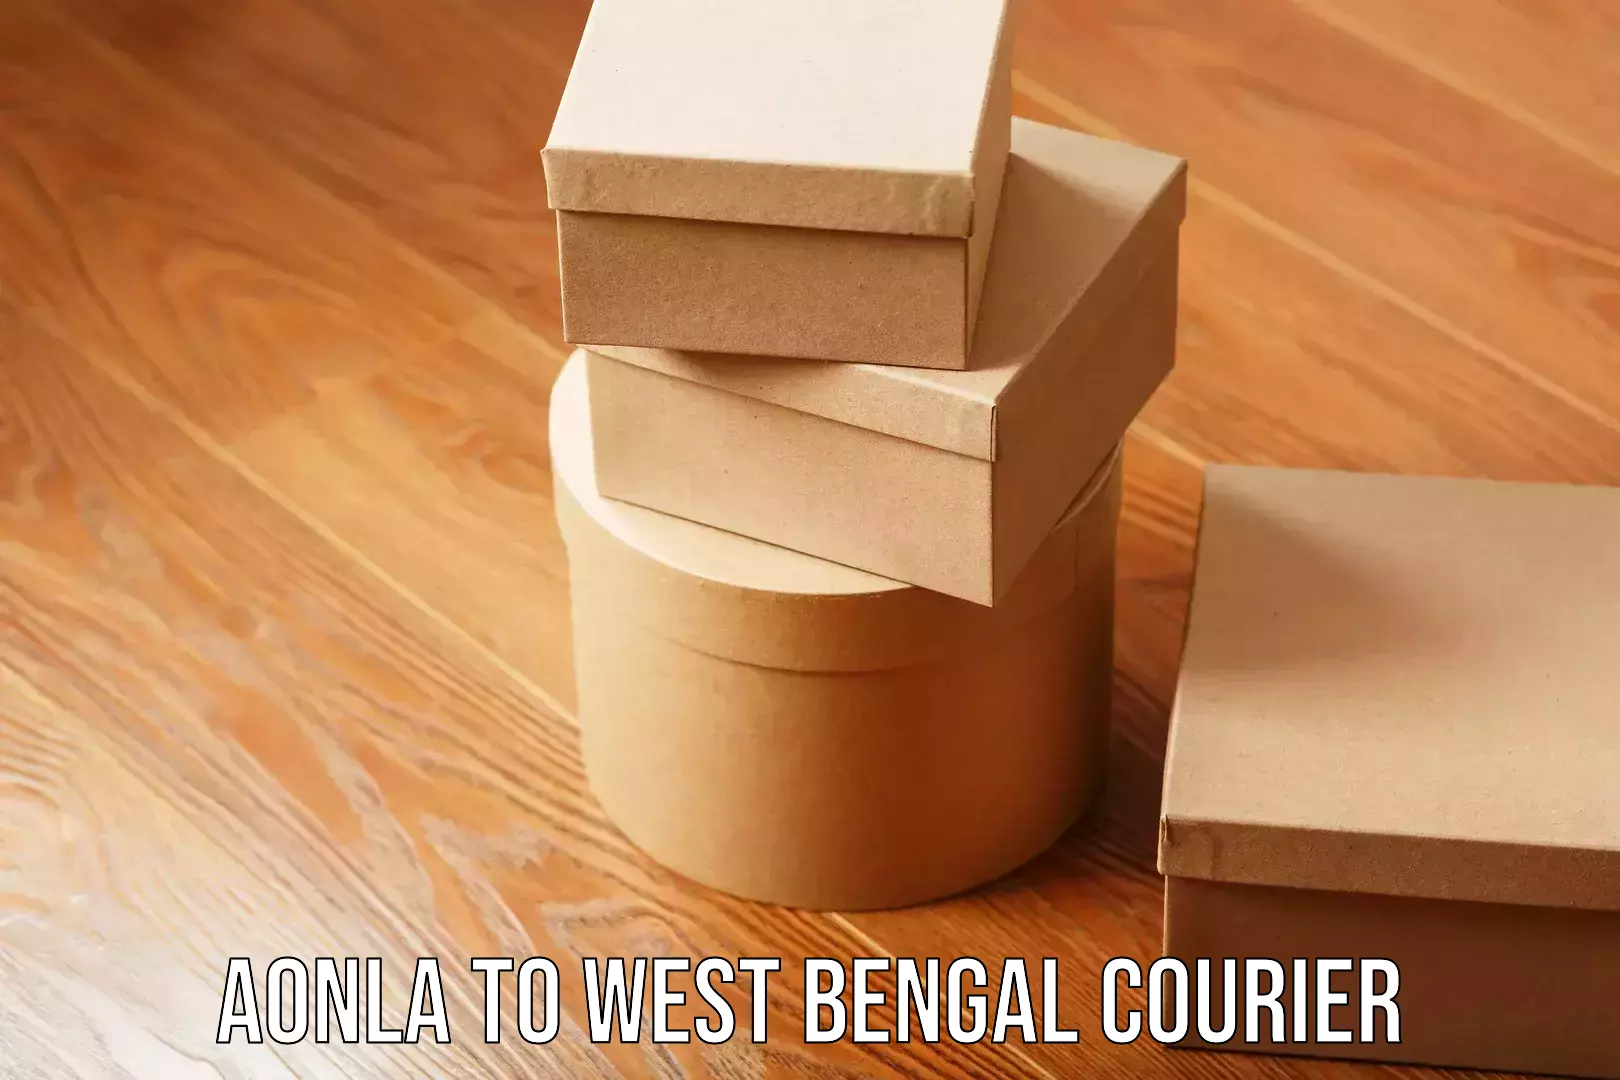 Premium courier solutions Aonla to West Bengal